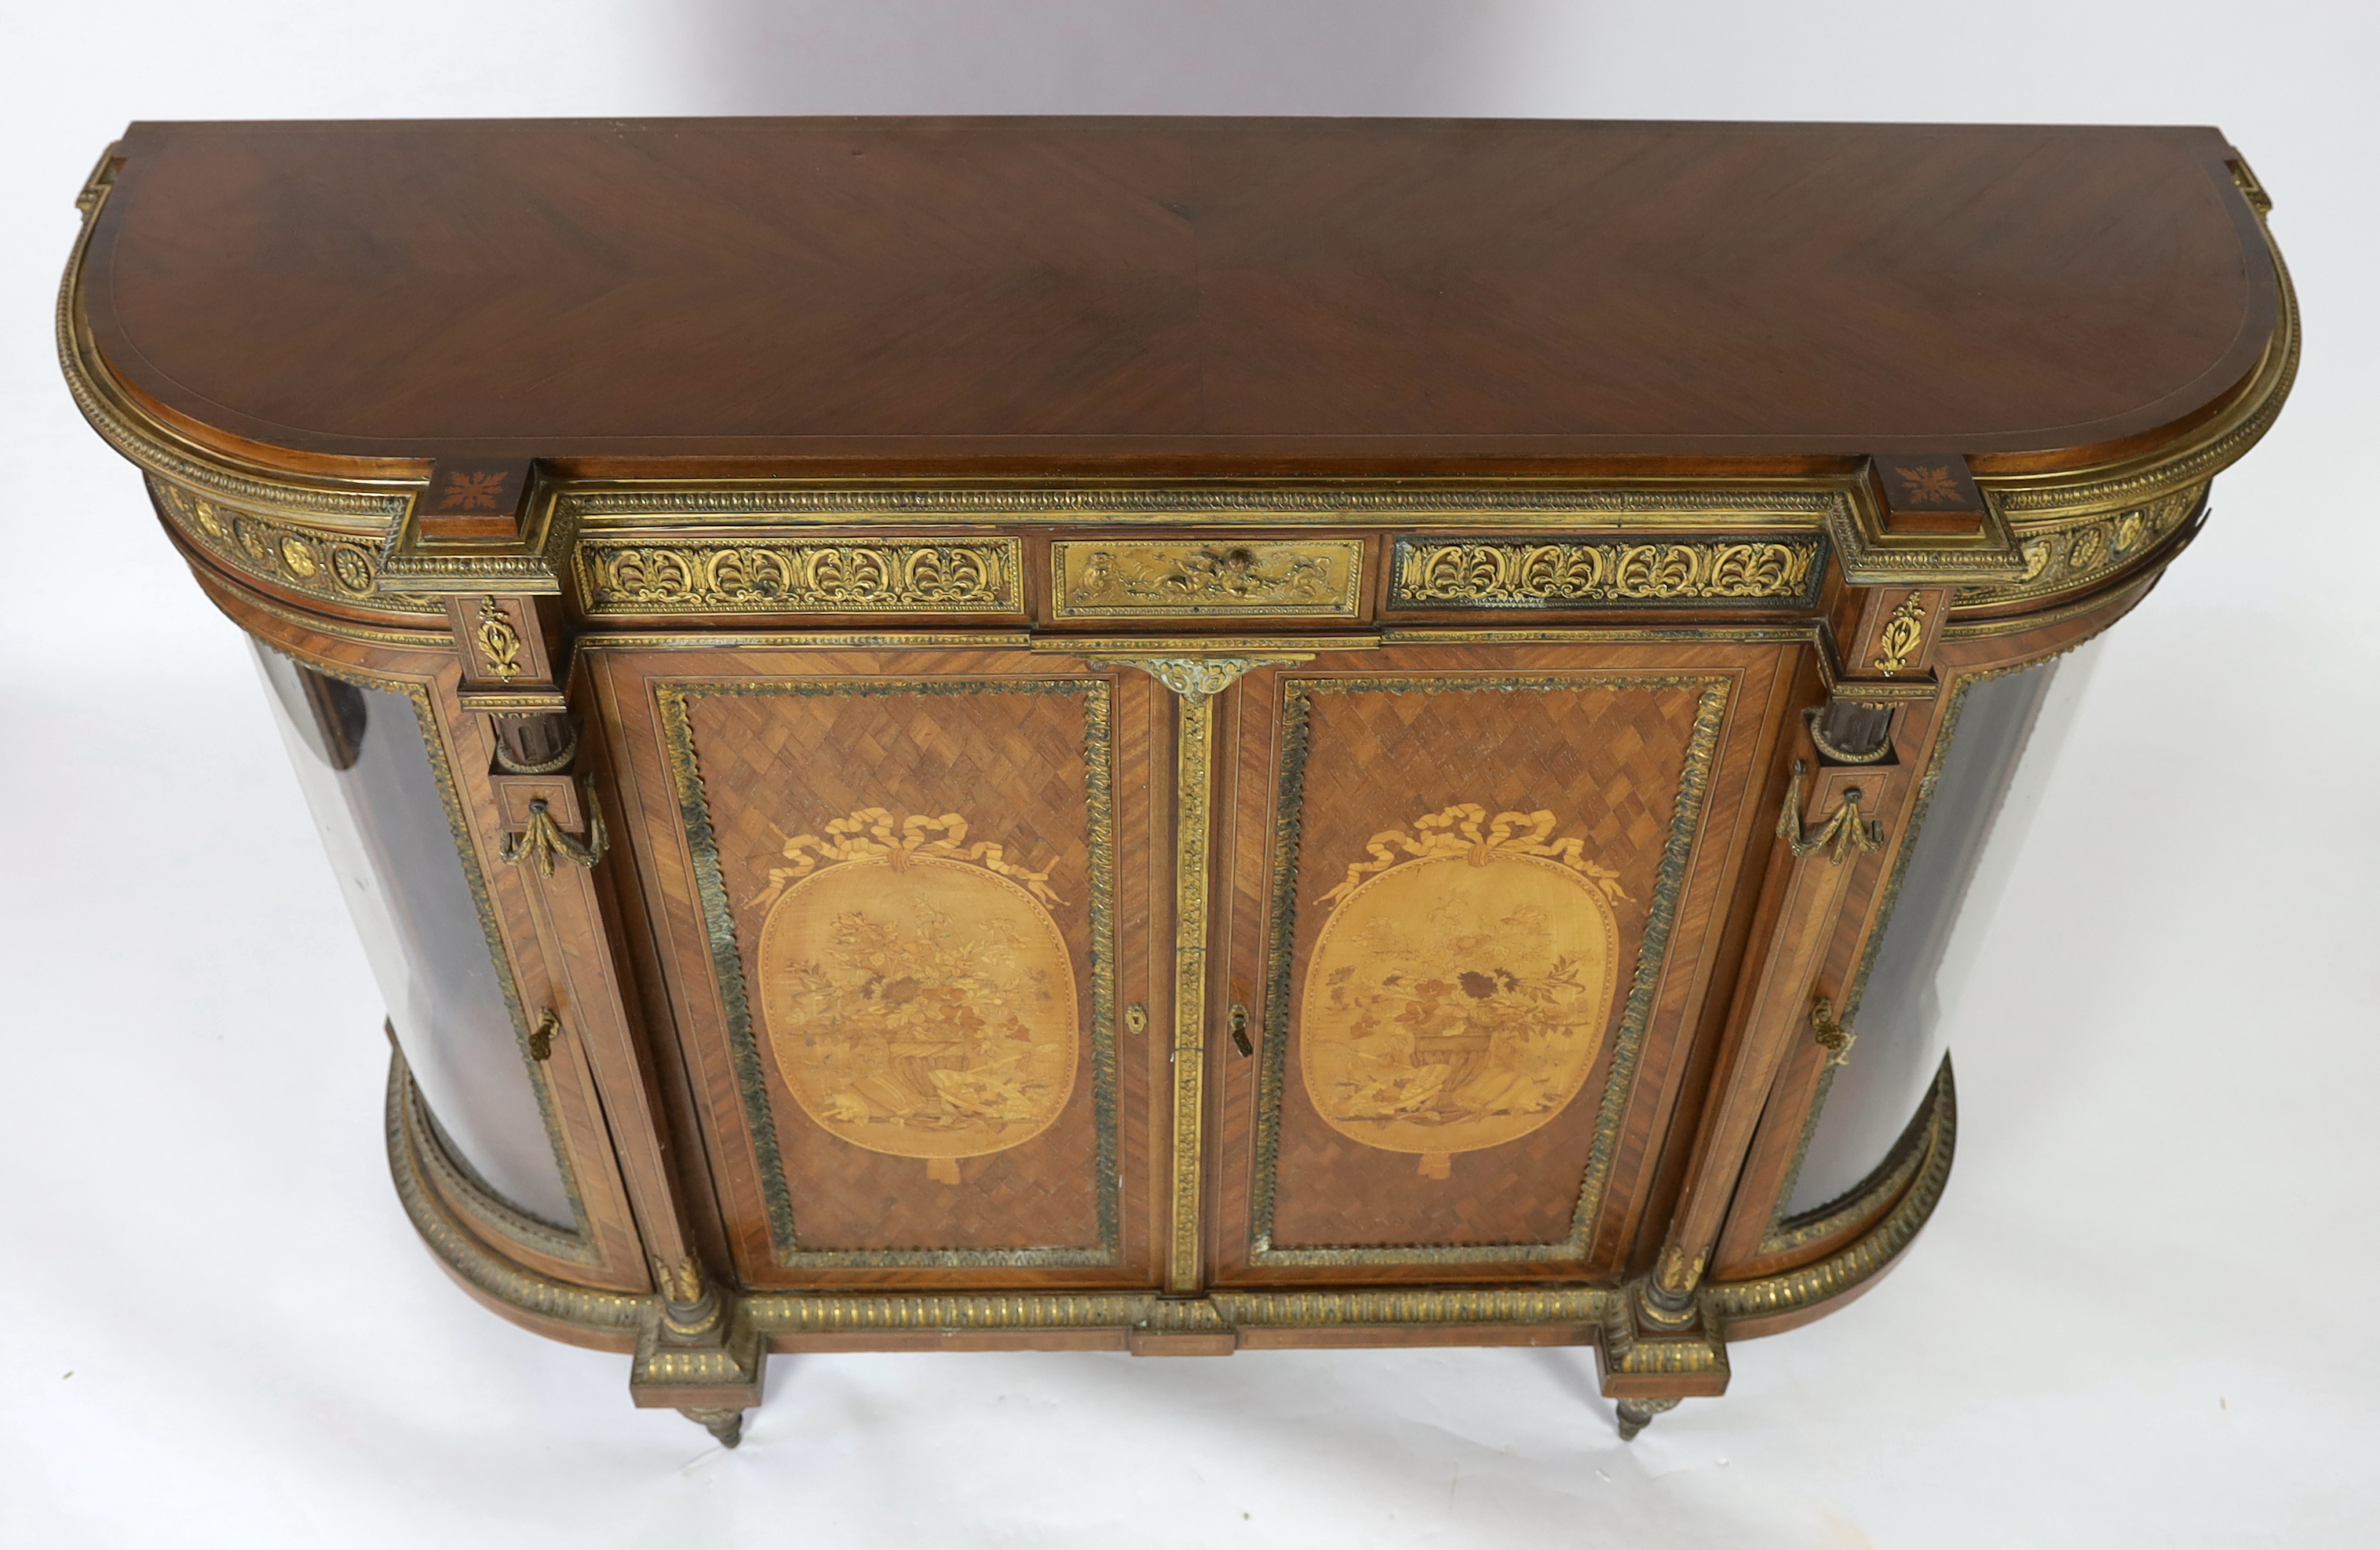 A late 19th century French Louis XVI style inlaid mahogany and ormolu mounted credenza